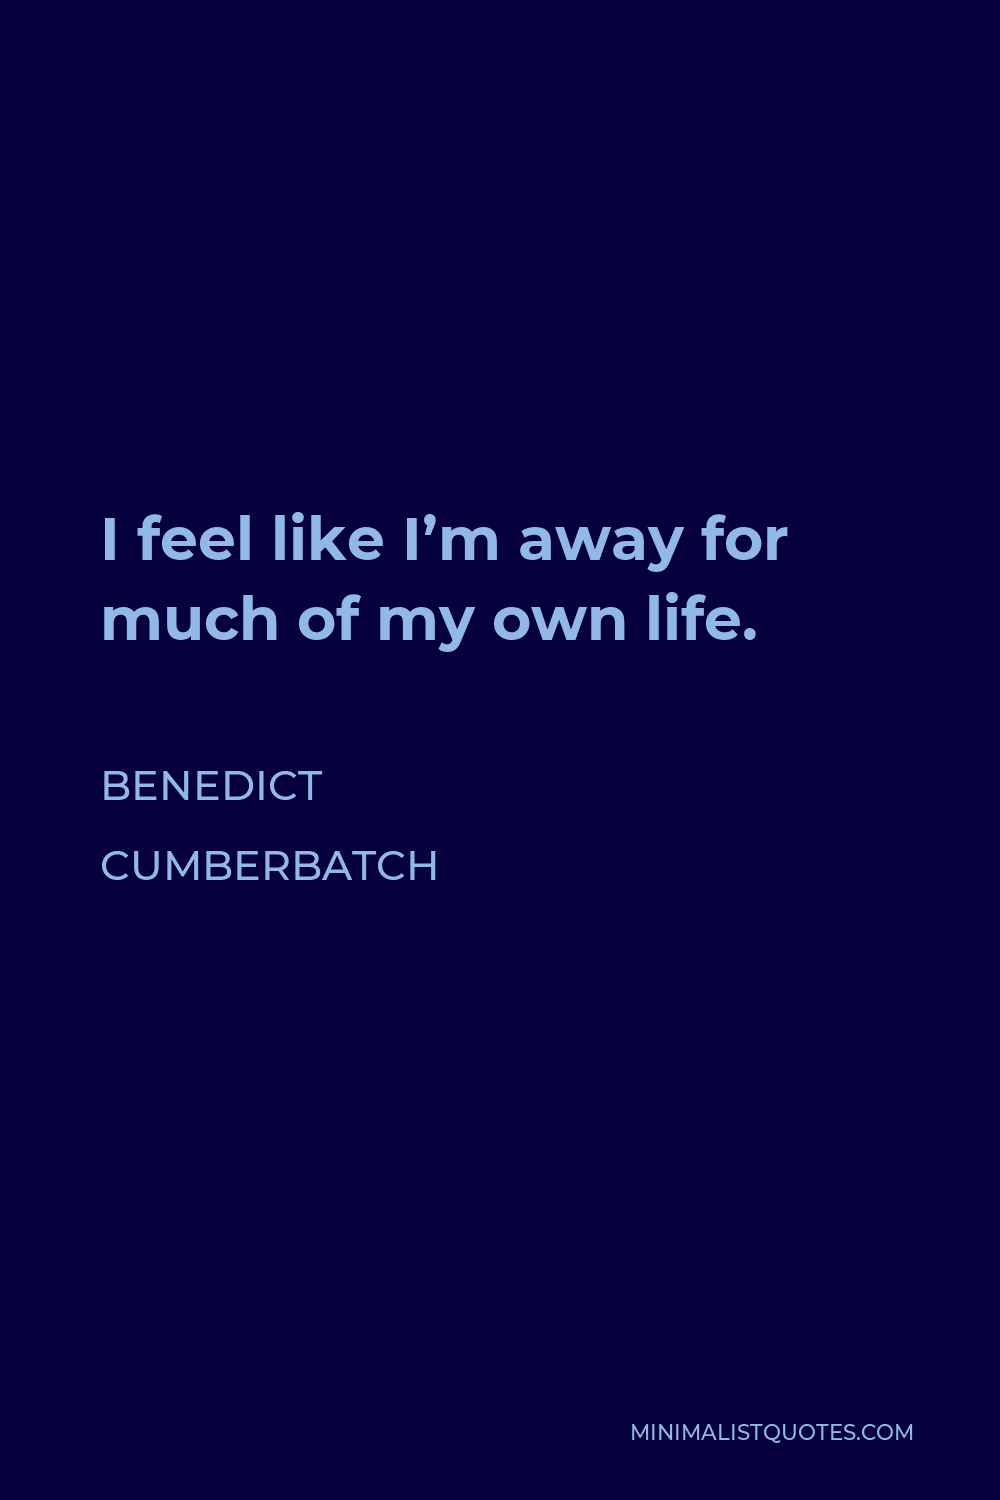 Benedict Cumberbatch Quote - I feel like I’m away for much of my own life.